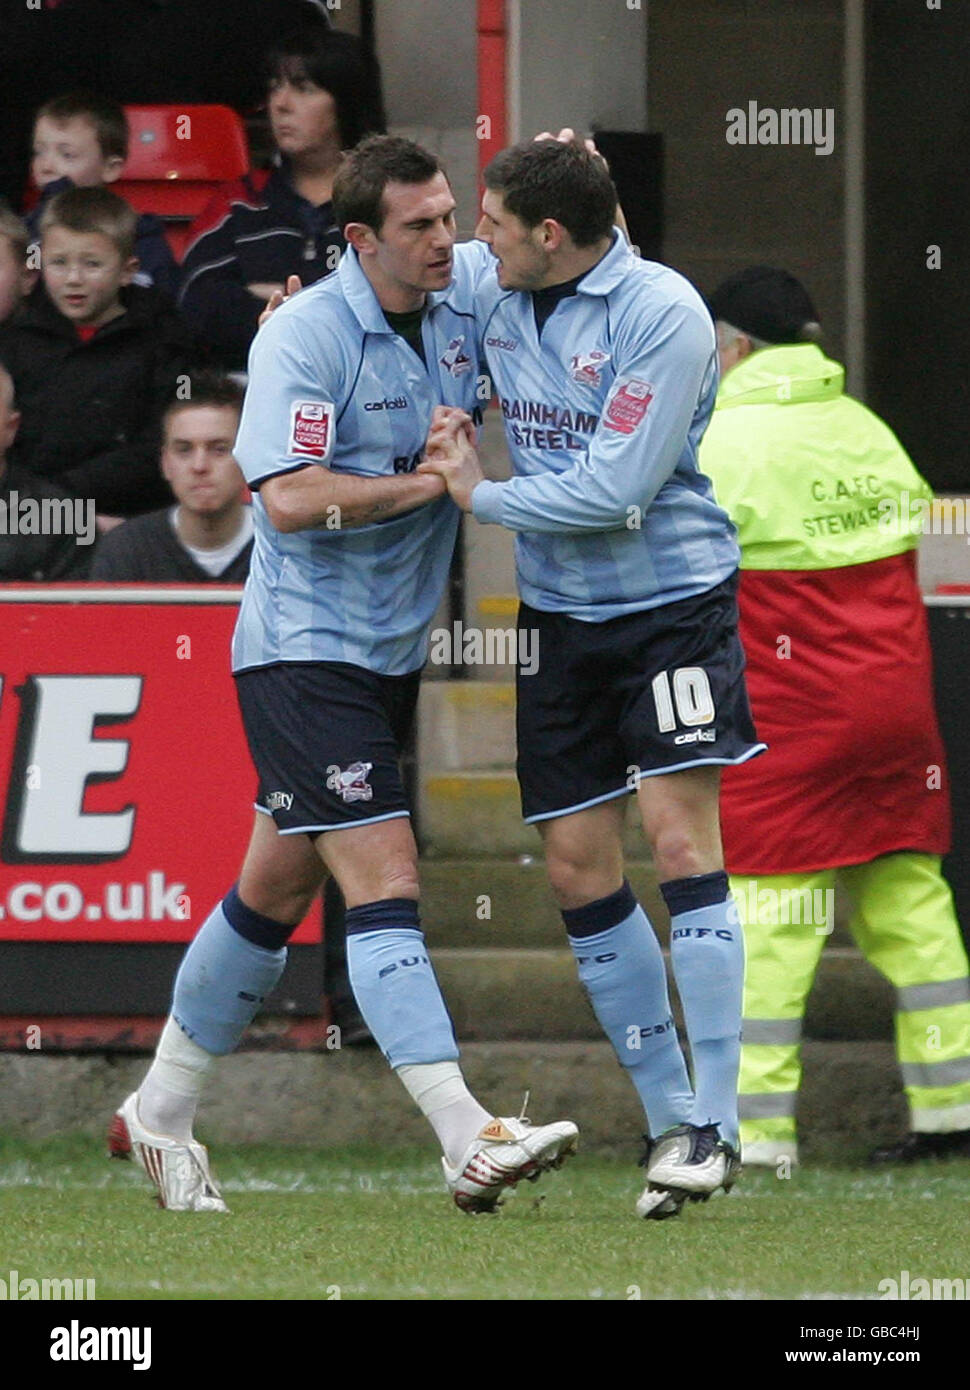 Scunthorpe United's Gary Hooper (right) congratulates Scunthorpe United's Paul Hayes on scoring his sides first goal during the Coca-Cola Football League One match at the Alexandra Stadium, Crewe. Stock Photo